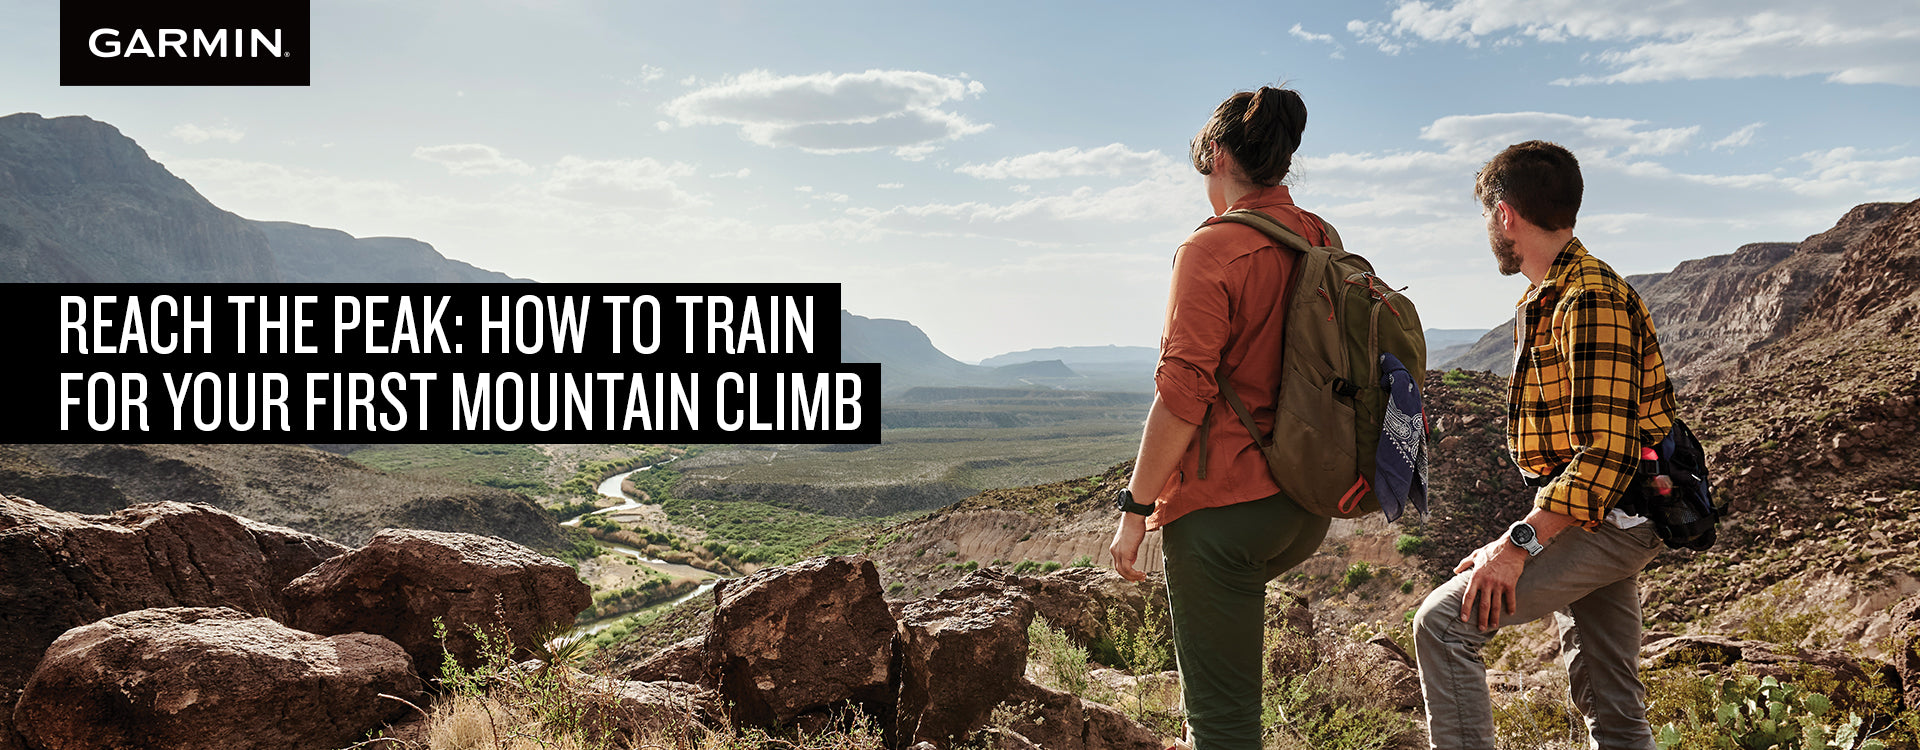 Reach the Peak: How to Train for Your First Mountain Climb